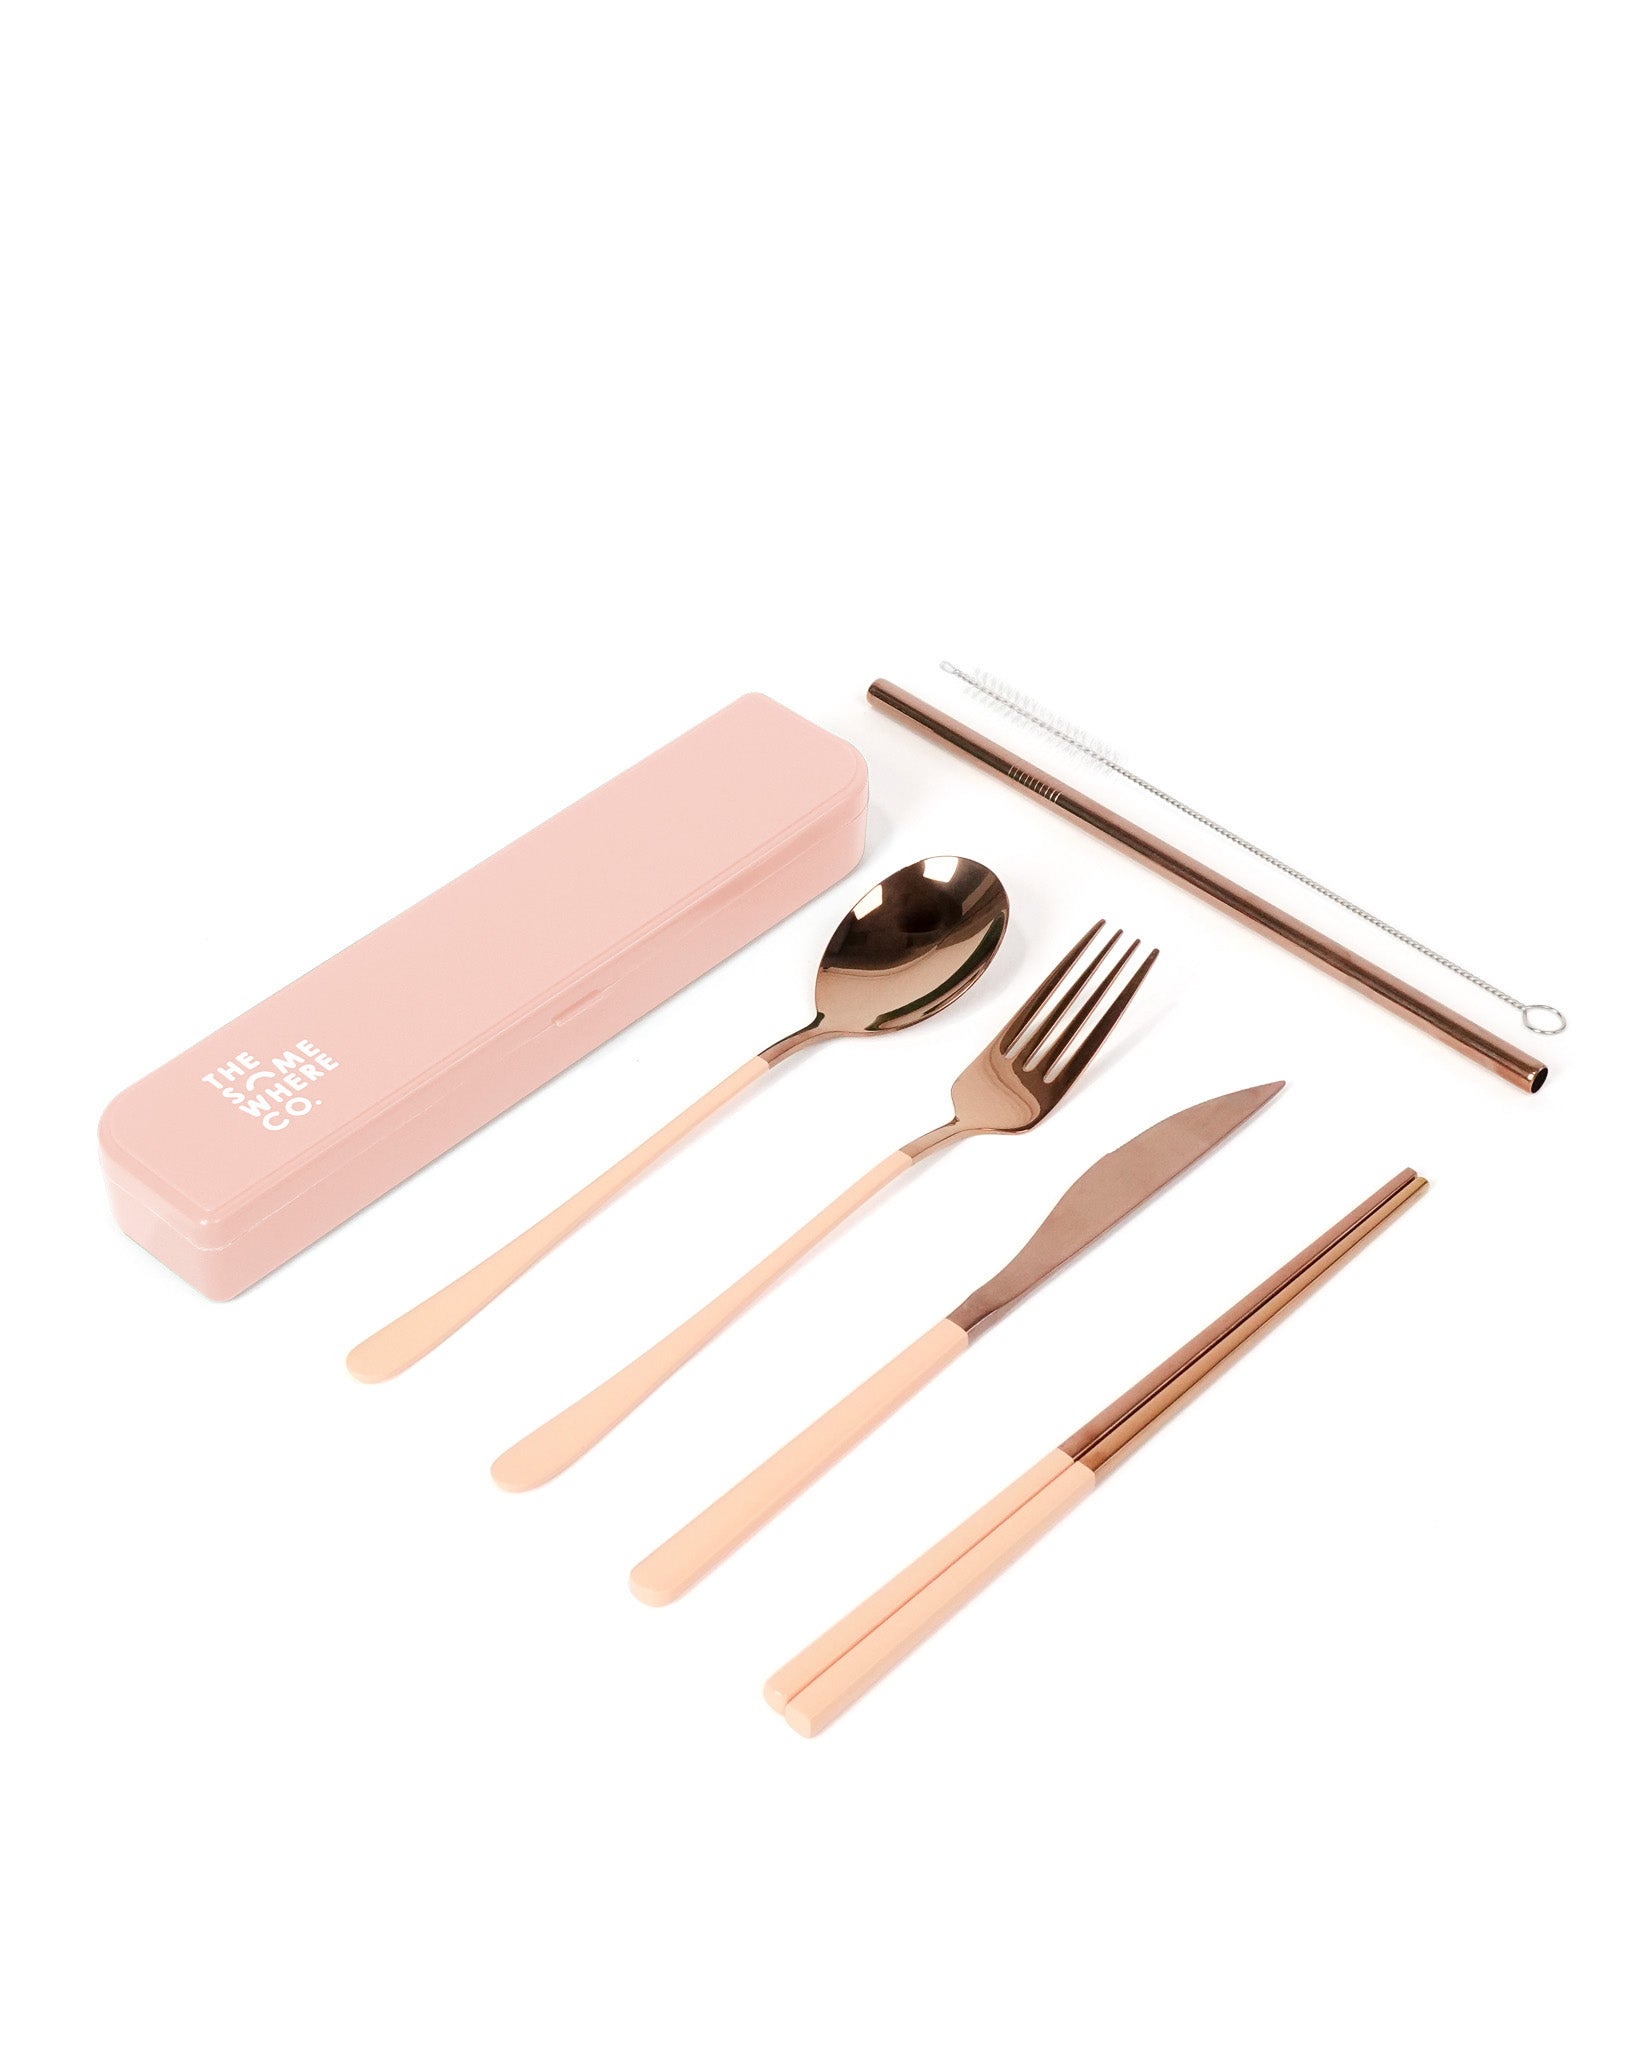 Cutlery Kit - Rose Gold with Blush Handle (PRE-ORDER)